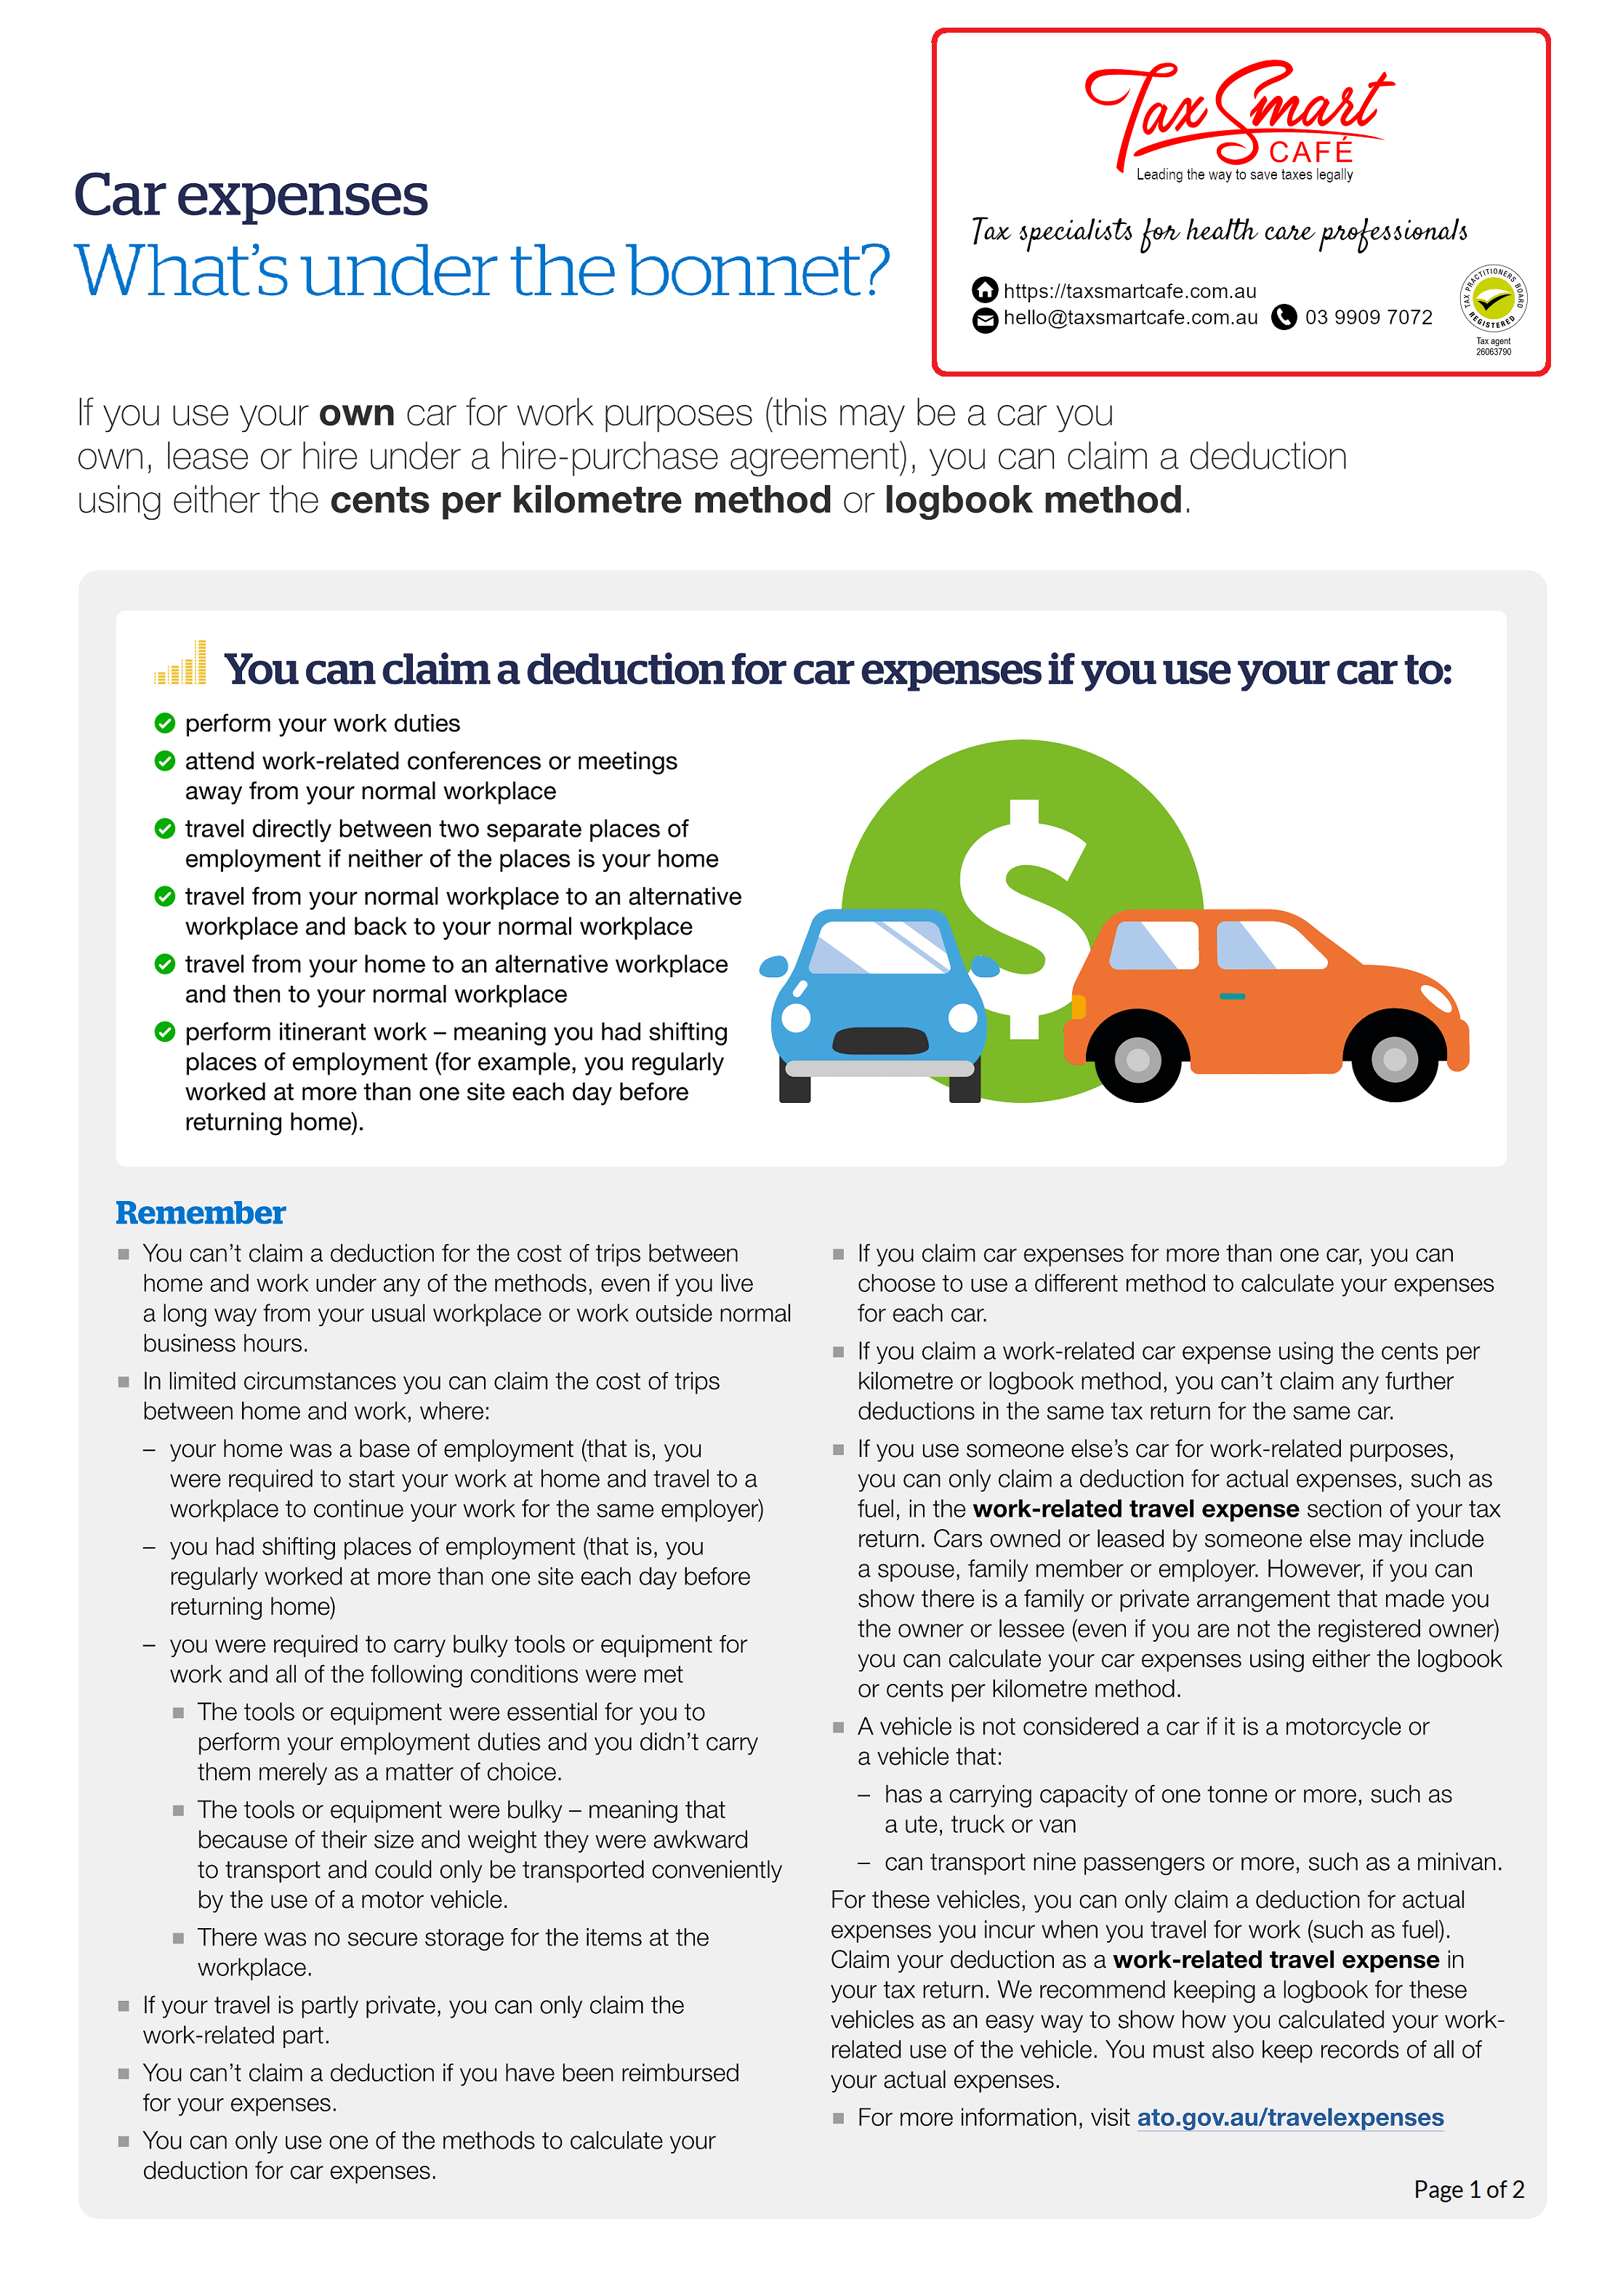 If you use your own car for work purposes, learn more how to claim deductions using the cents per kilometre or logbook hmethod. Go through this guide to learn m